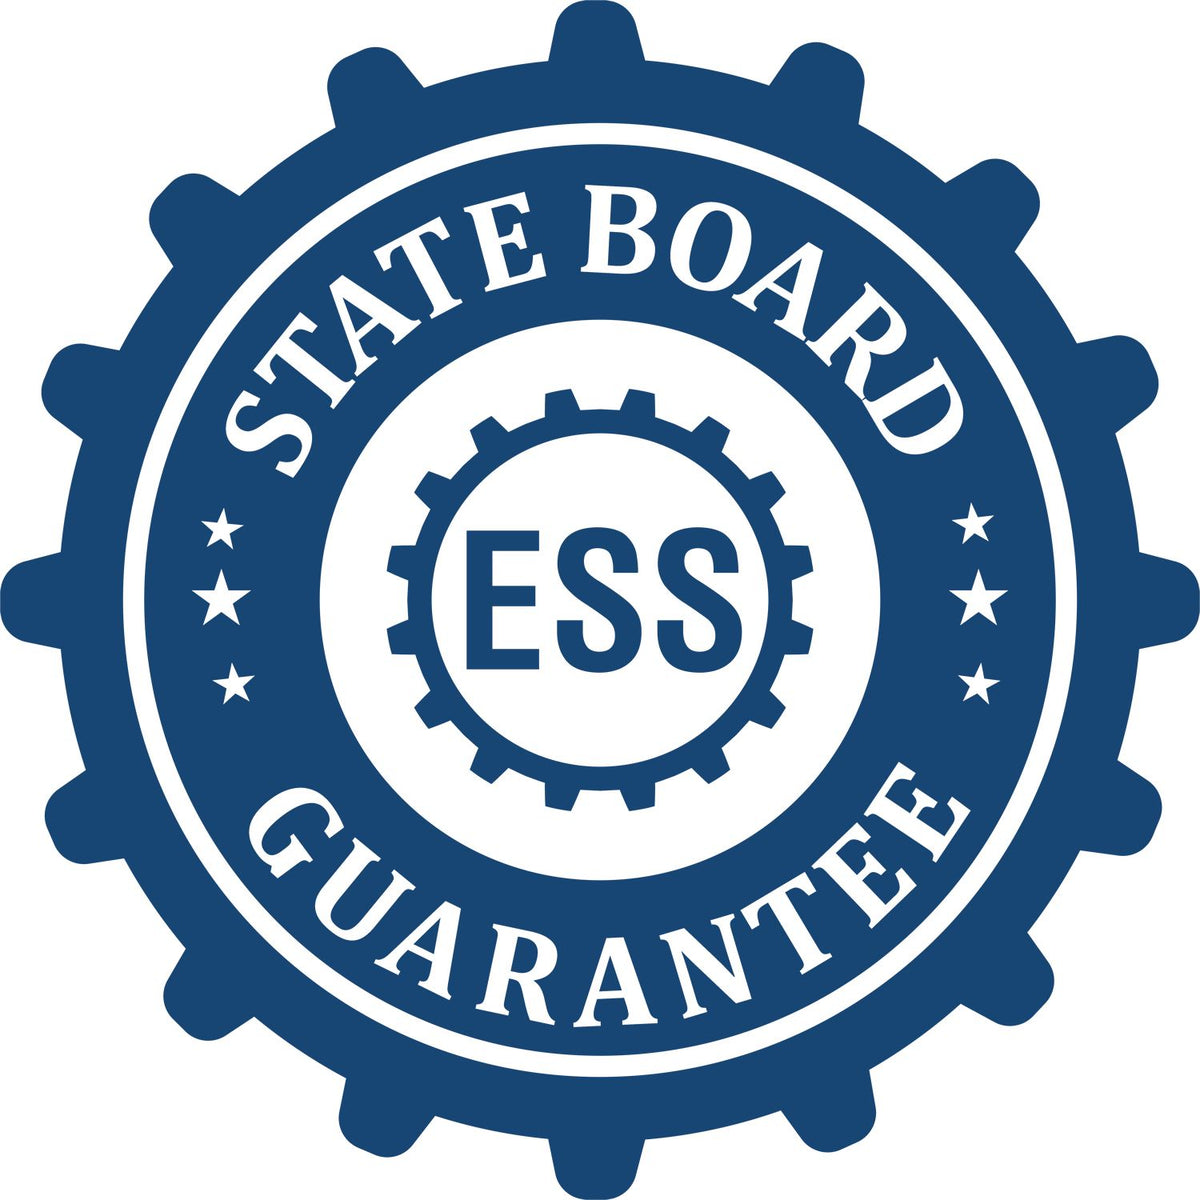 Landscape Architect eSeal Electronic Image Stamp of Seal 3008LA State Board Guarantee